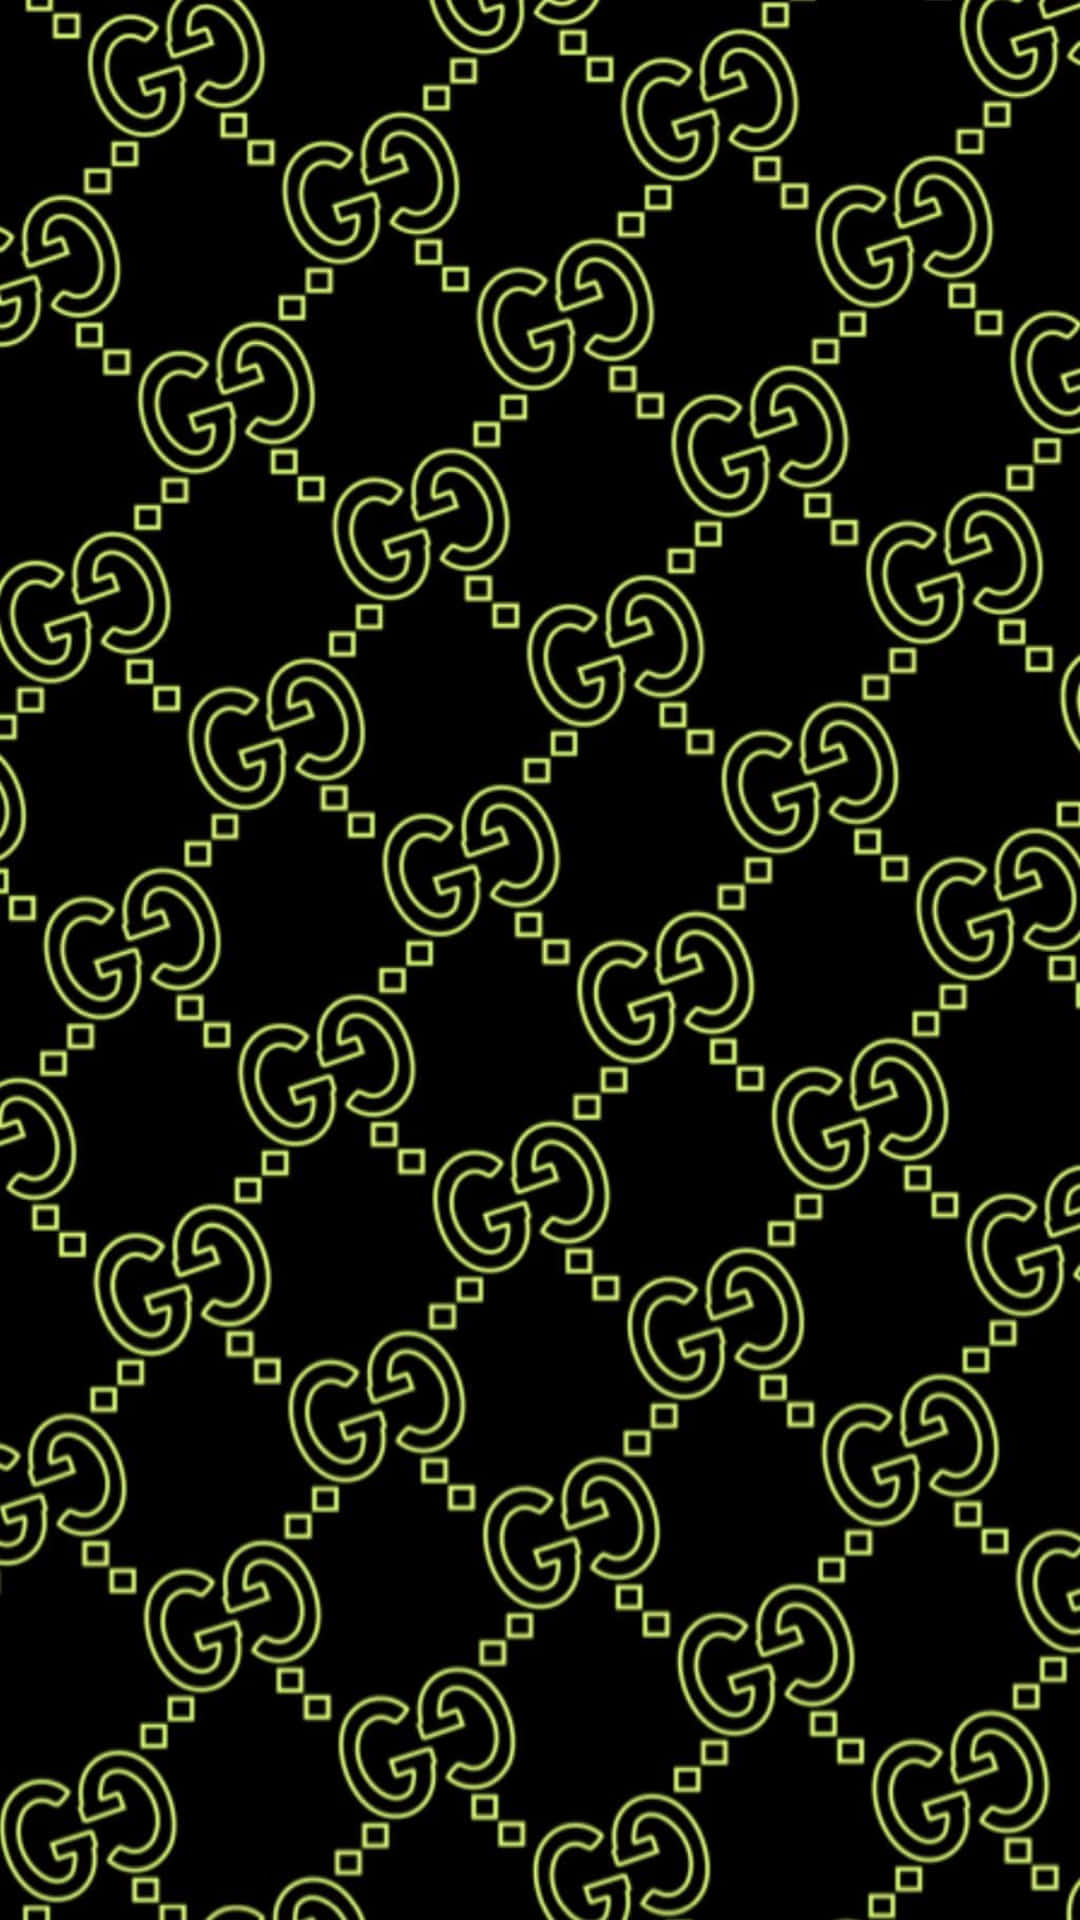 Free Gucci Green Wallpaper Downloads, [100+] Gucci Green Wallpapers for  FREE 